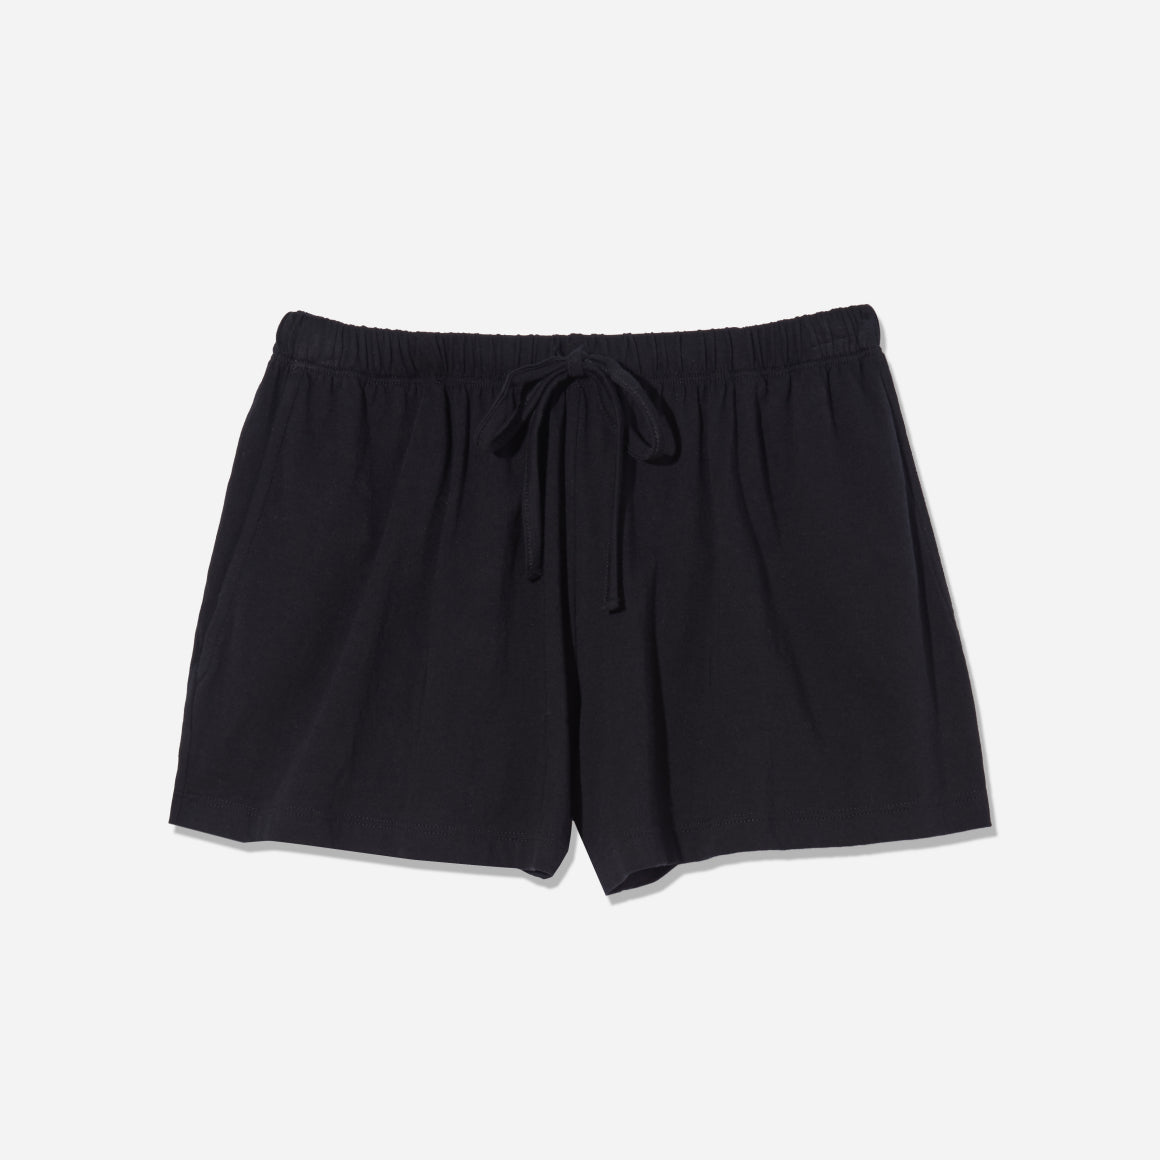 The Casey shorts feature a versatile design that effortlessly combines comfort and style. With a relaxed fit and a mid-rise waist, they offer a flattering silhouette that suits various body types. The elastic waist and self-tie provide a customized fit, while the organic cotton fabric provides a lightweight and airy feel, perfect for keeping cool during warm summer days.